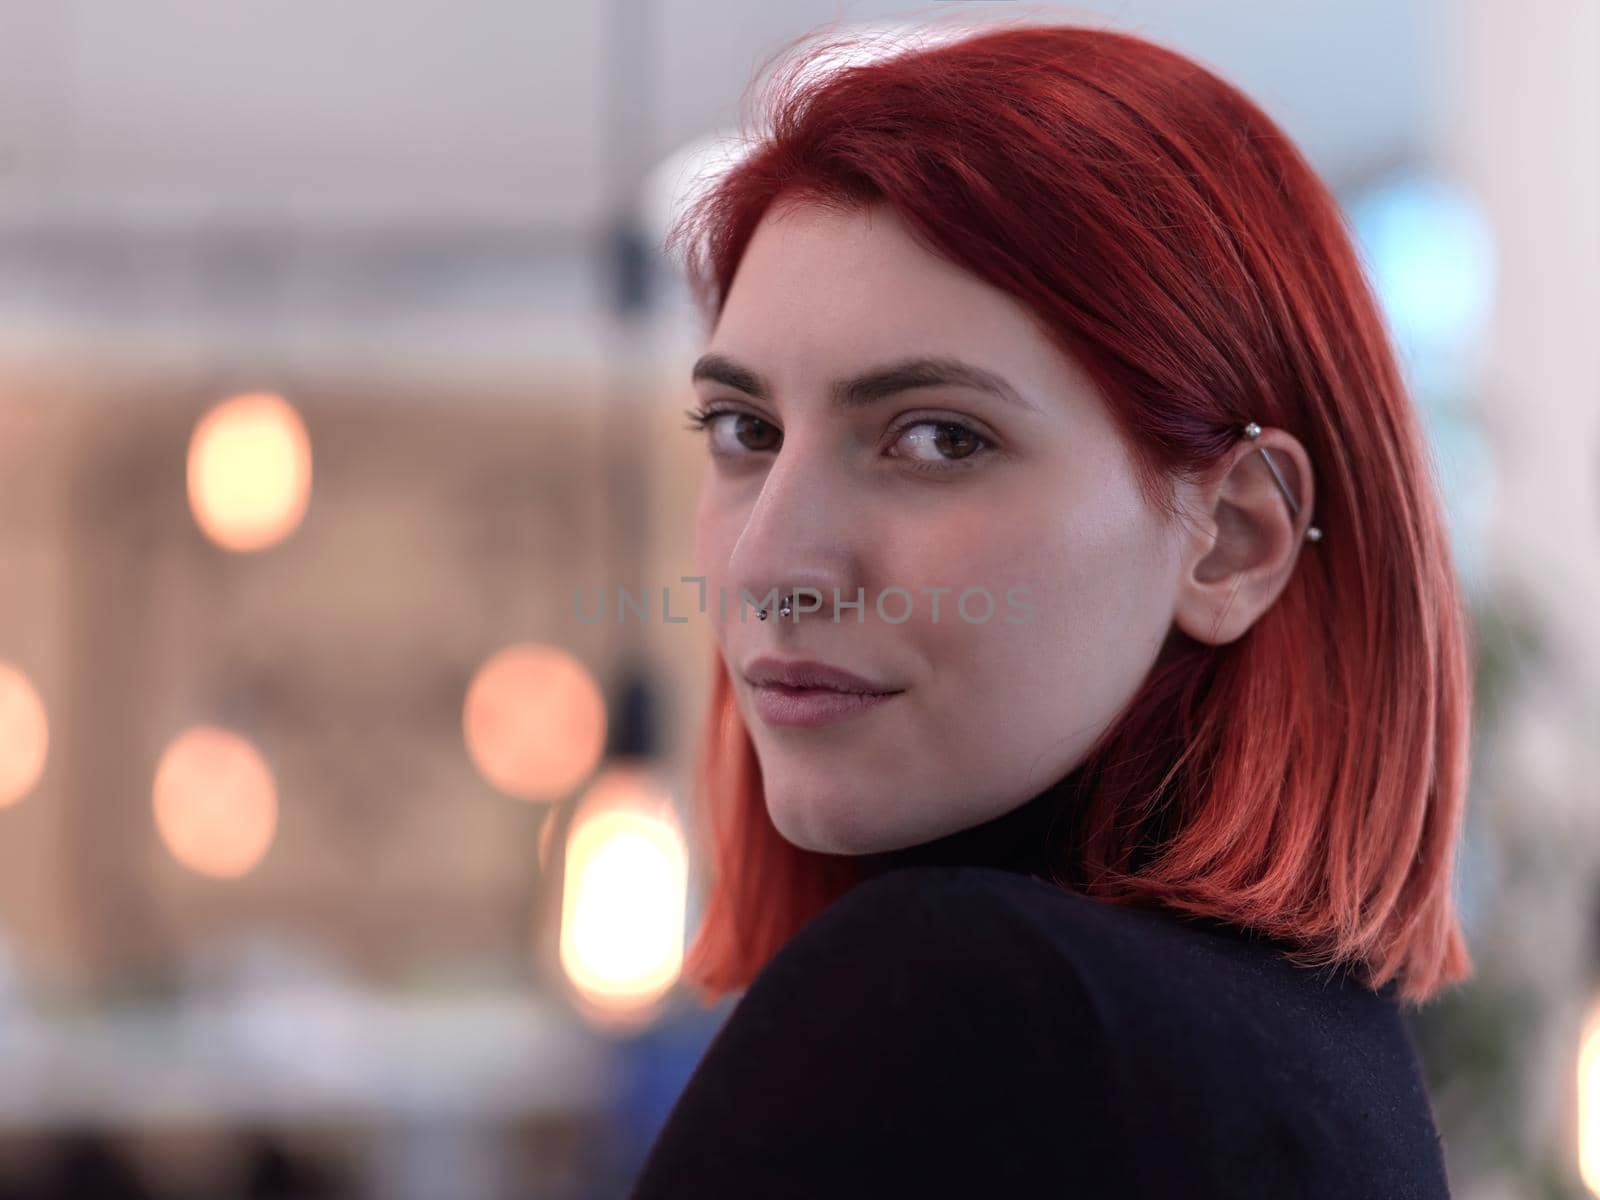 redhead business woman portrait as influencer in creative modern coworking startup open space office